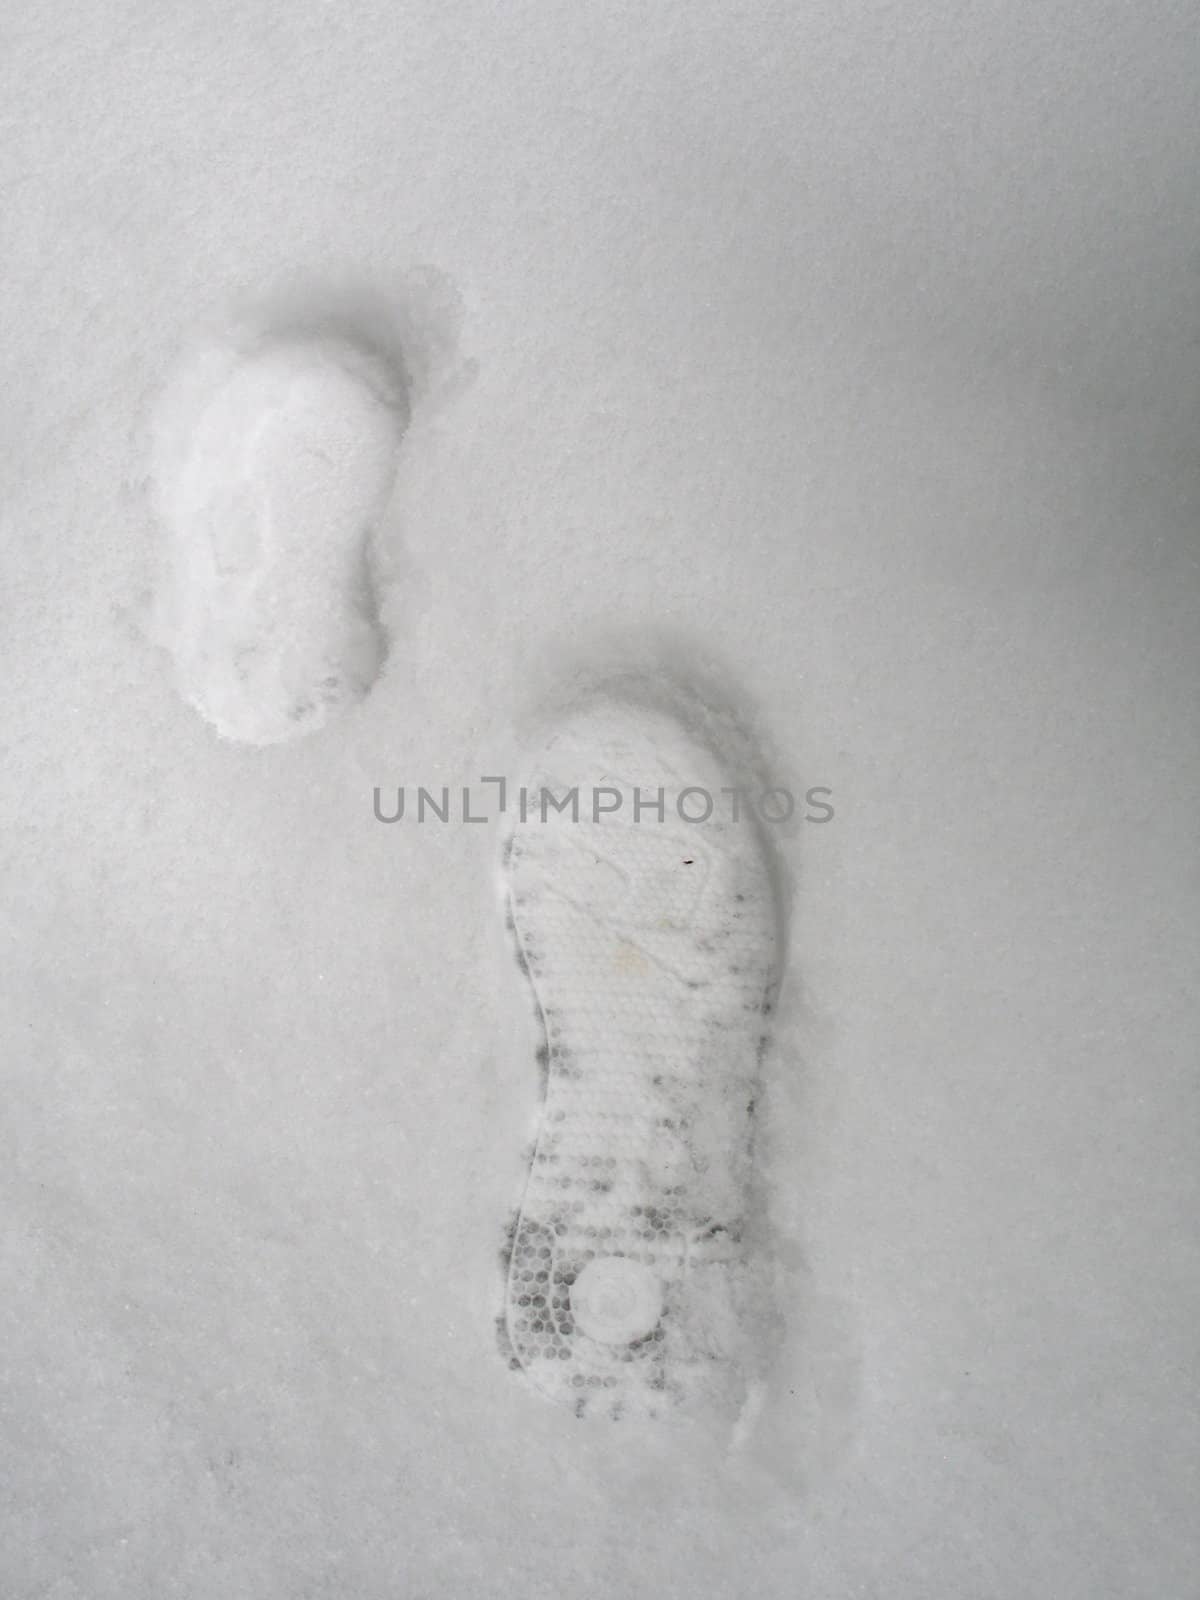 prints in the snow by mmm